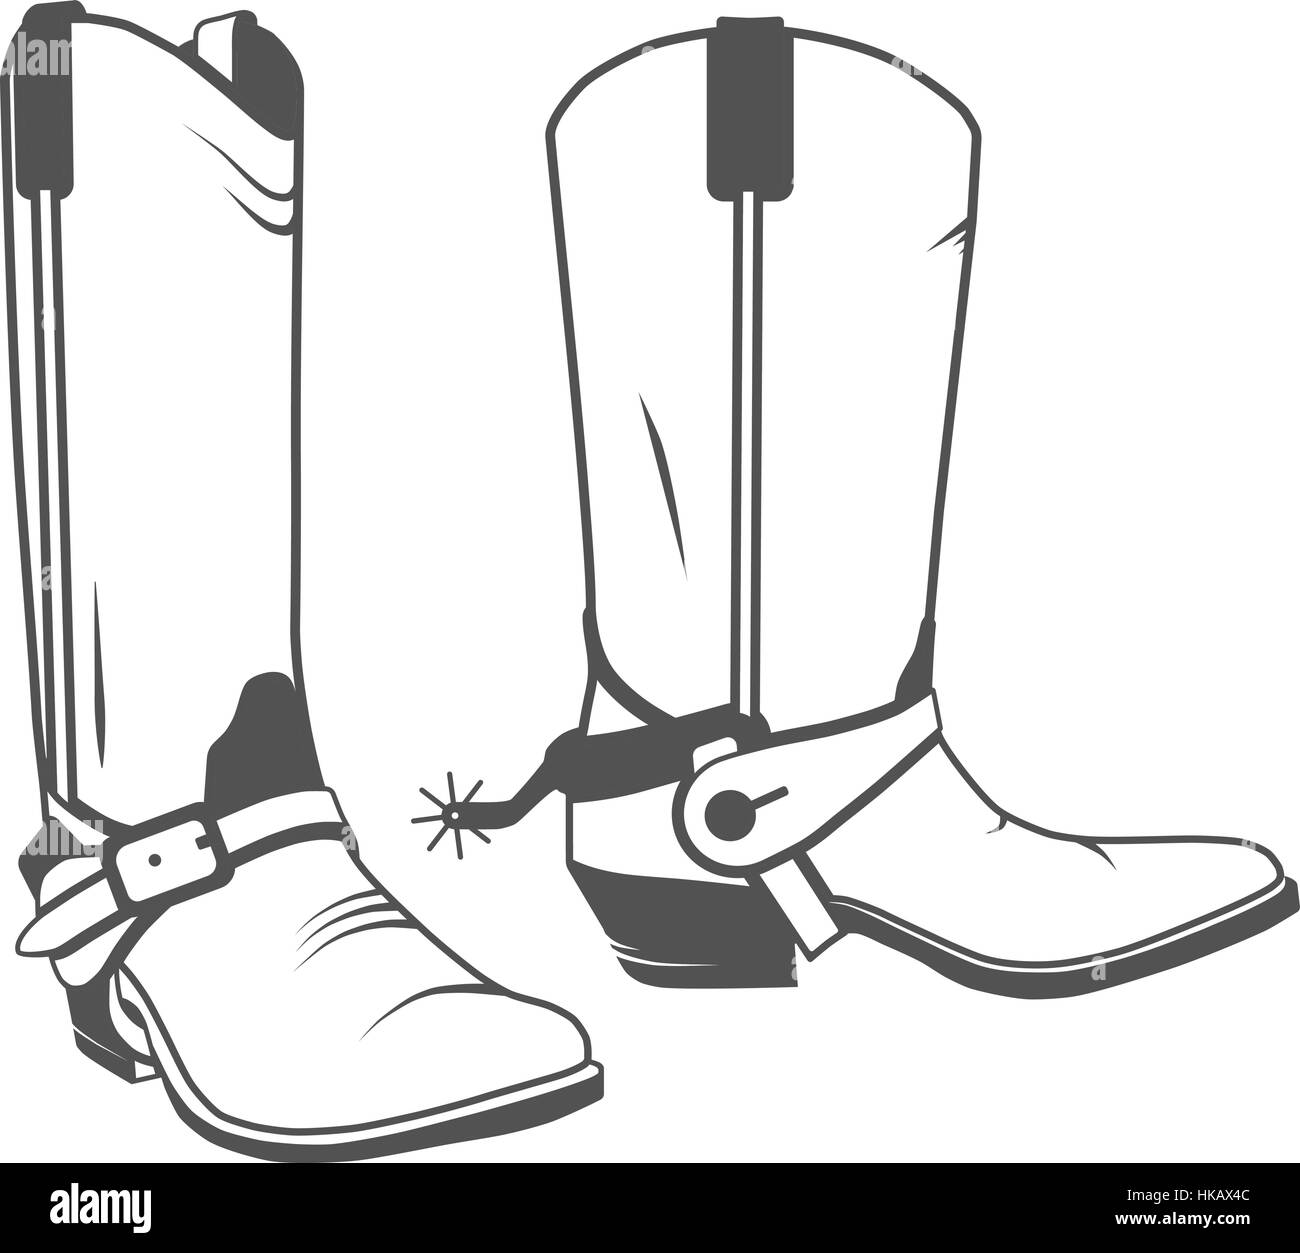 Two Vintage Western Cowboy Boots. Vector illustration. Stock Vector